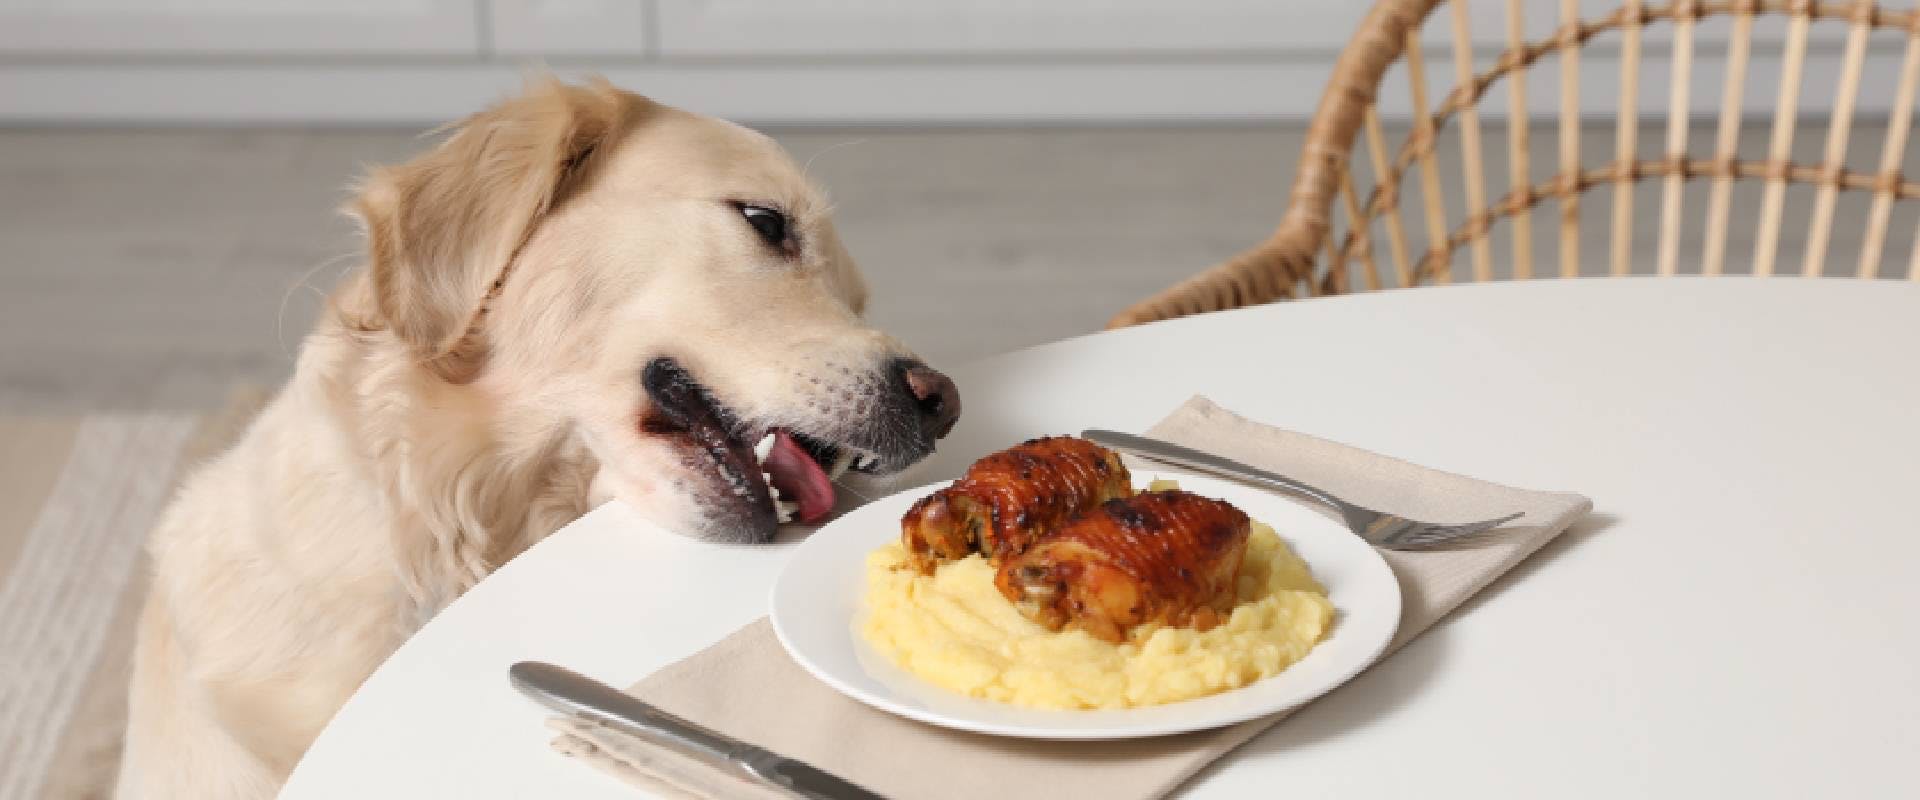 Dog trying to steal food from human plate